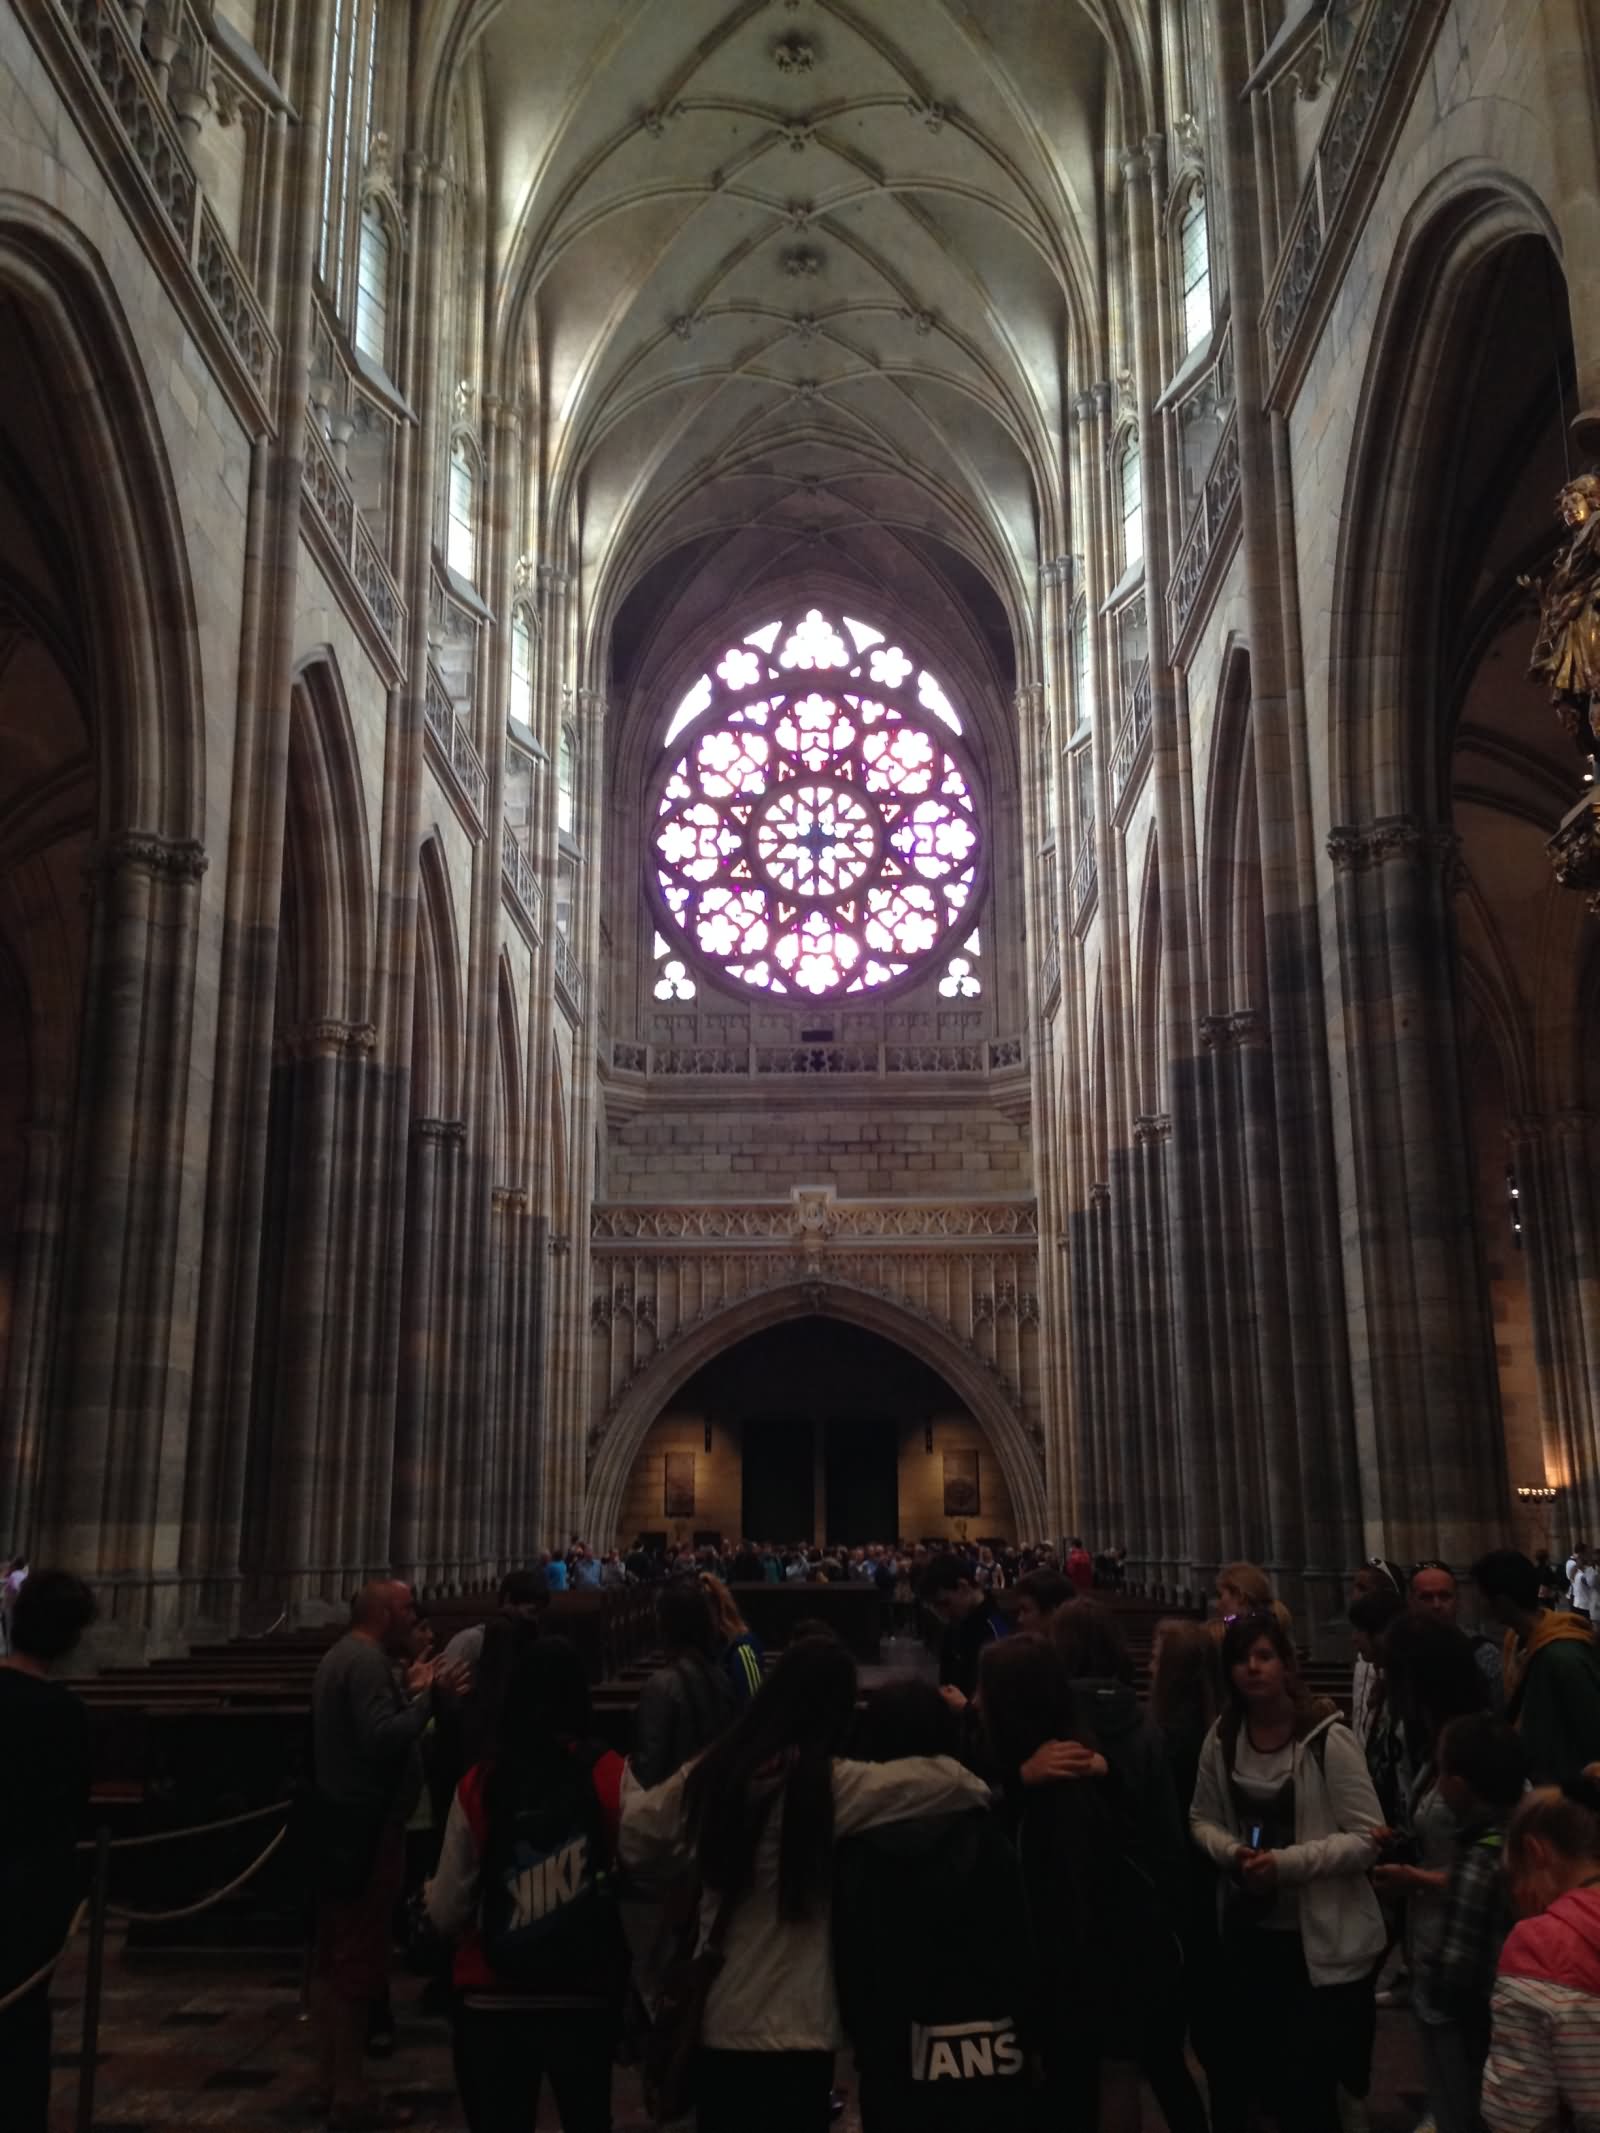 Crowd Inside The St. Vitus Cathedral